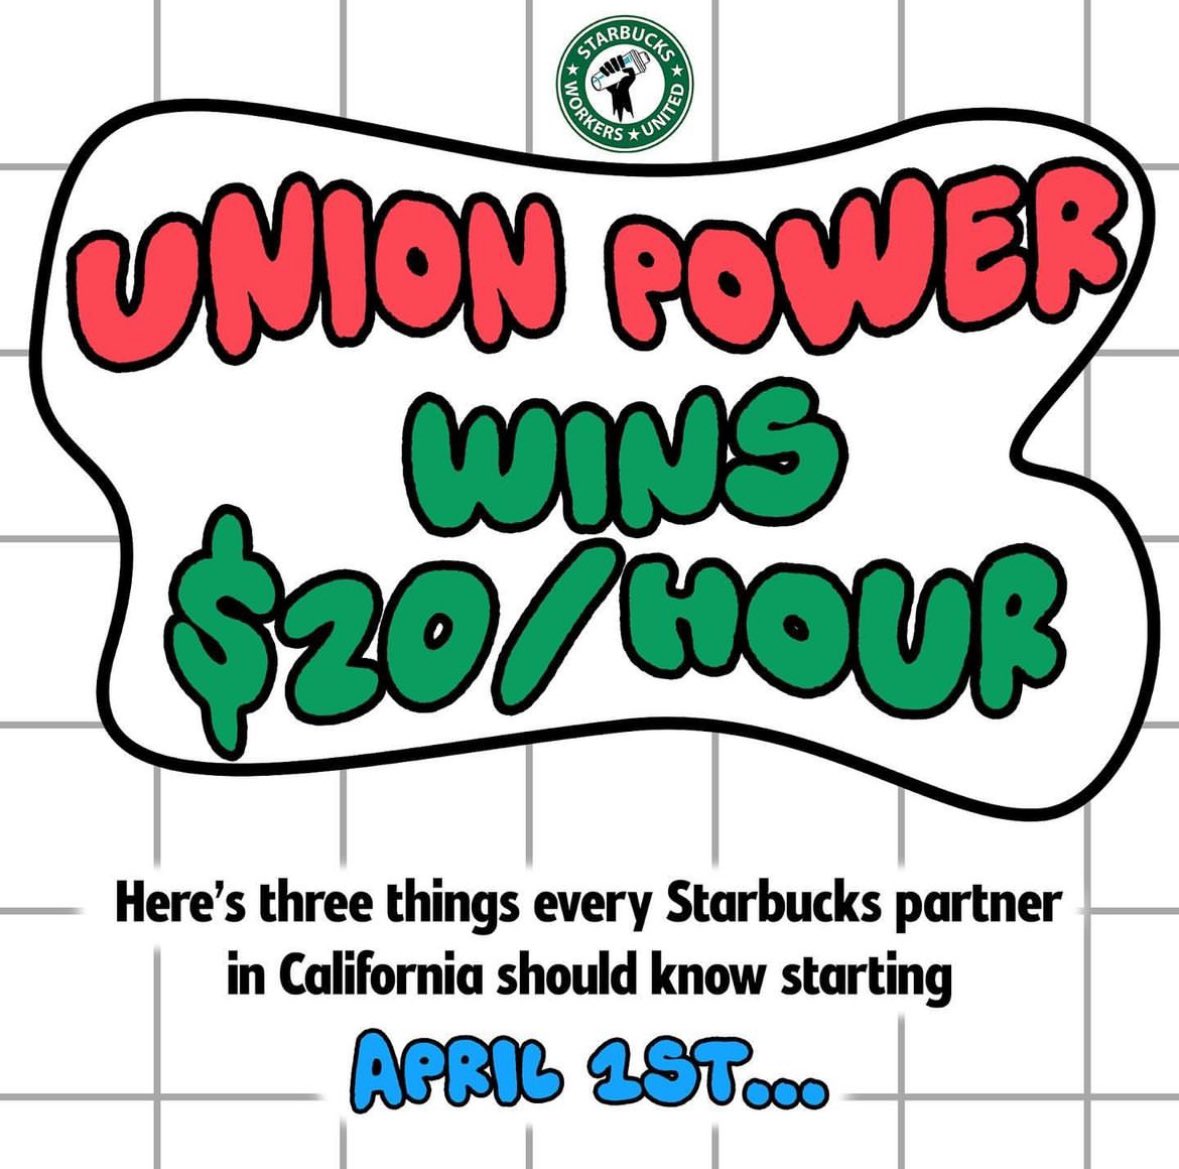 And for those that say this is unrealistic, we just need to look across the Atlantic where @SBWorkersUnited have won $20 an hour for Baristas - which is almost £16 an hour!